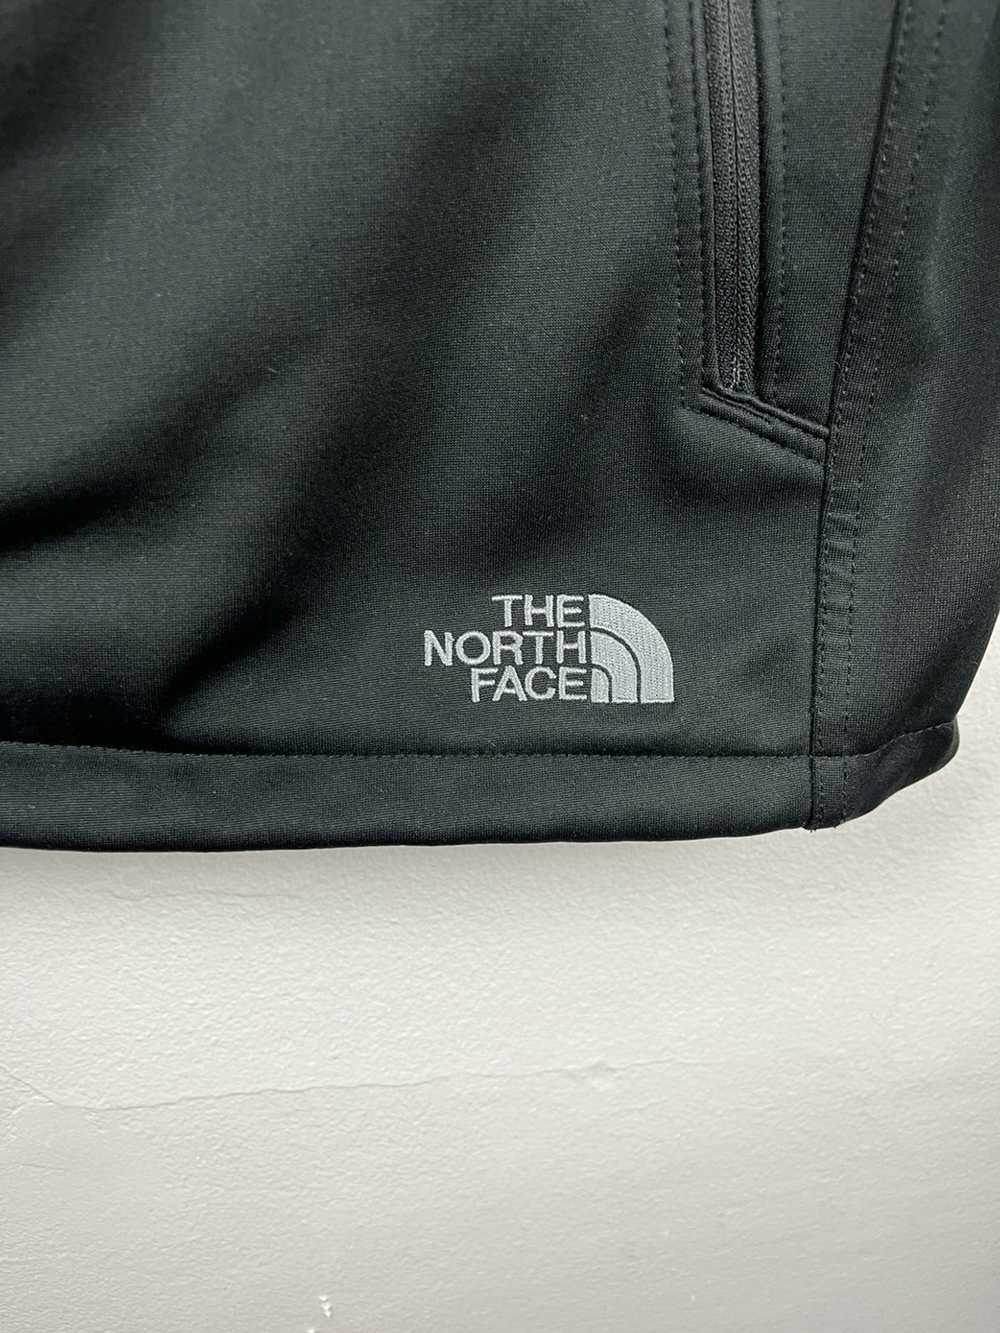 The North Face The North Face Vest - image 3